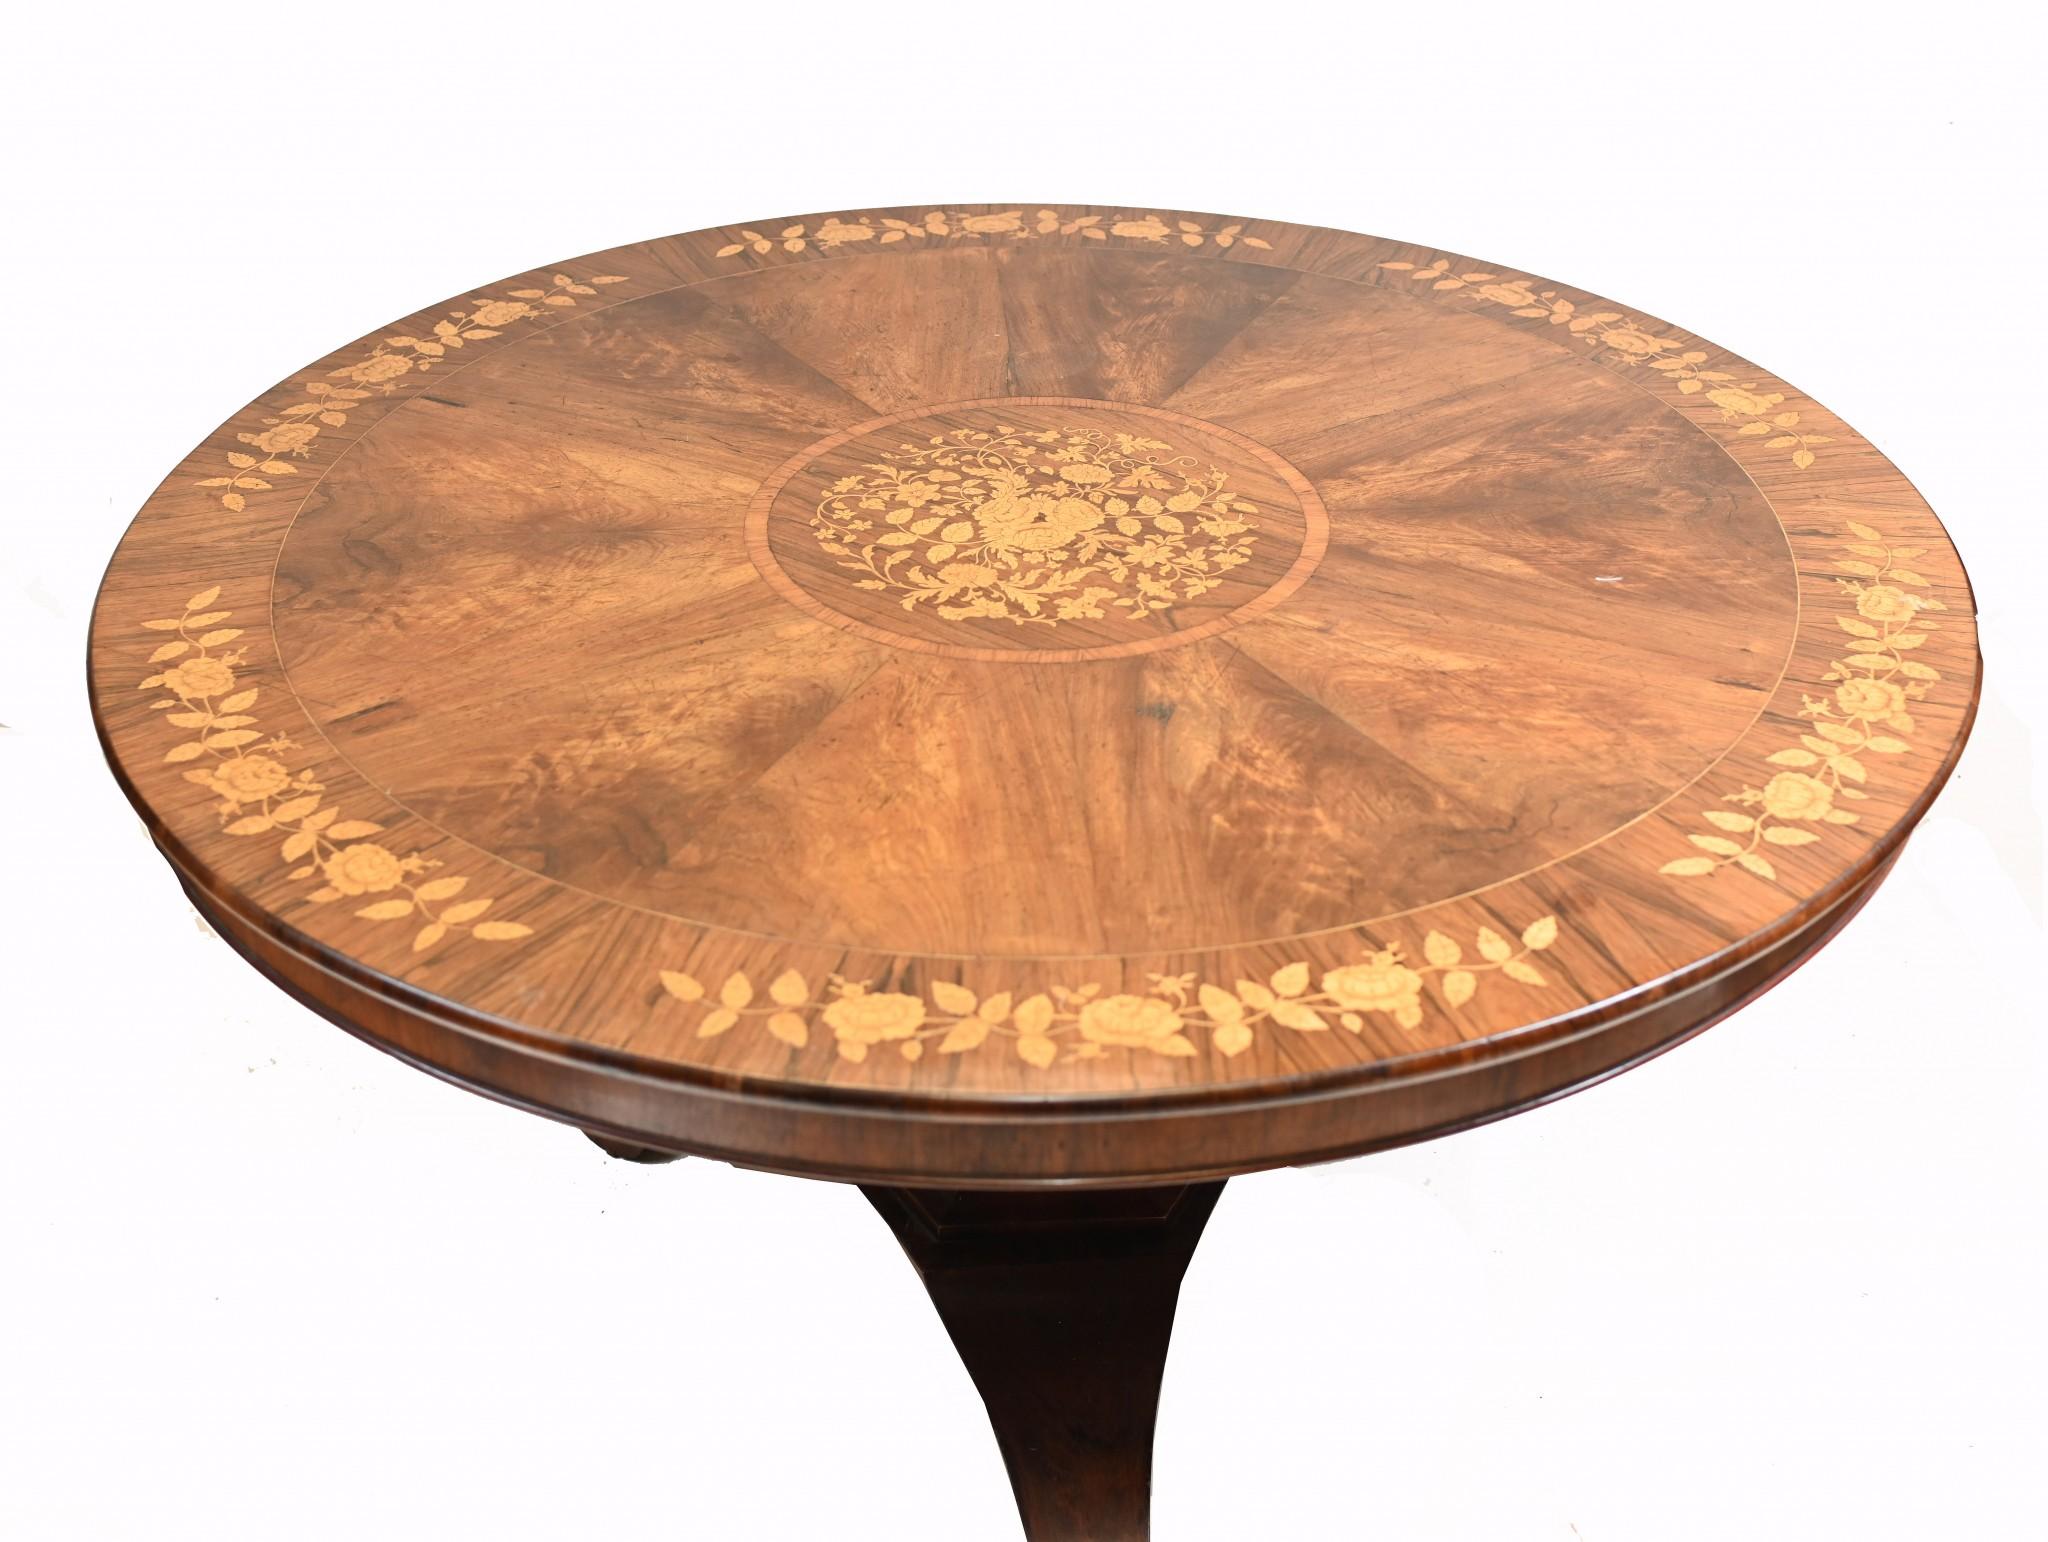 Elegant Victorian round centre table that can also be used for dining
Walnut with rosewood crossbanding decorated with marquetry flower patterns 
Circa 1830
Offered in great shape ready for home use right away
We ship to every corner of the